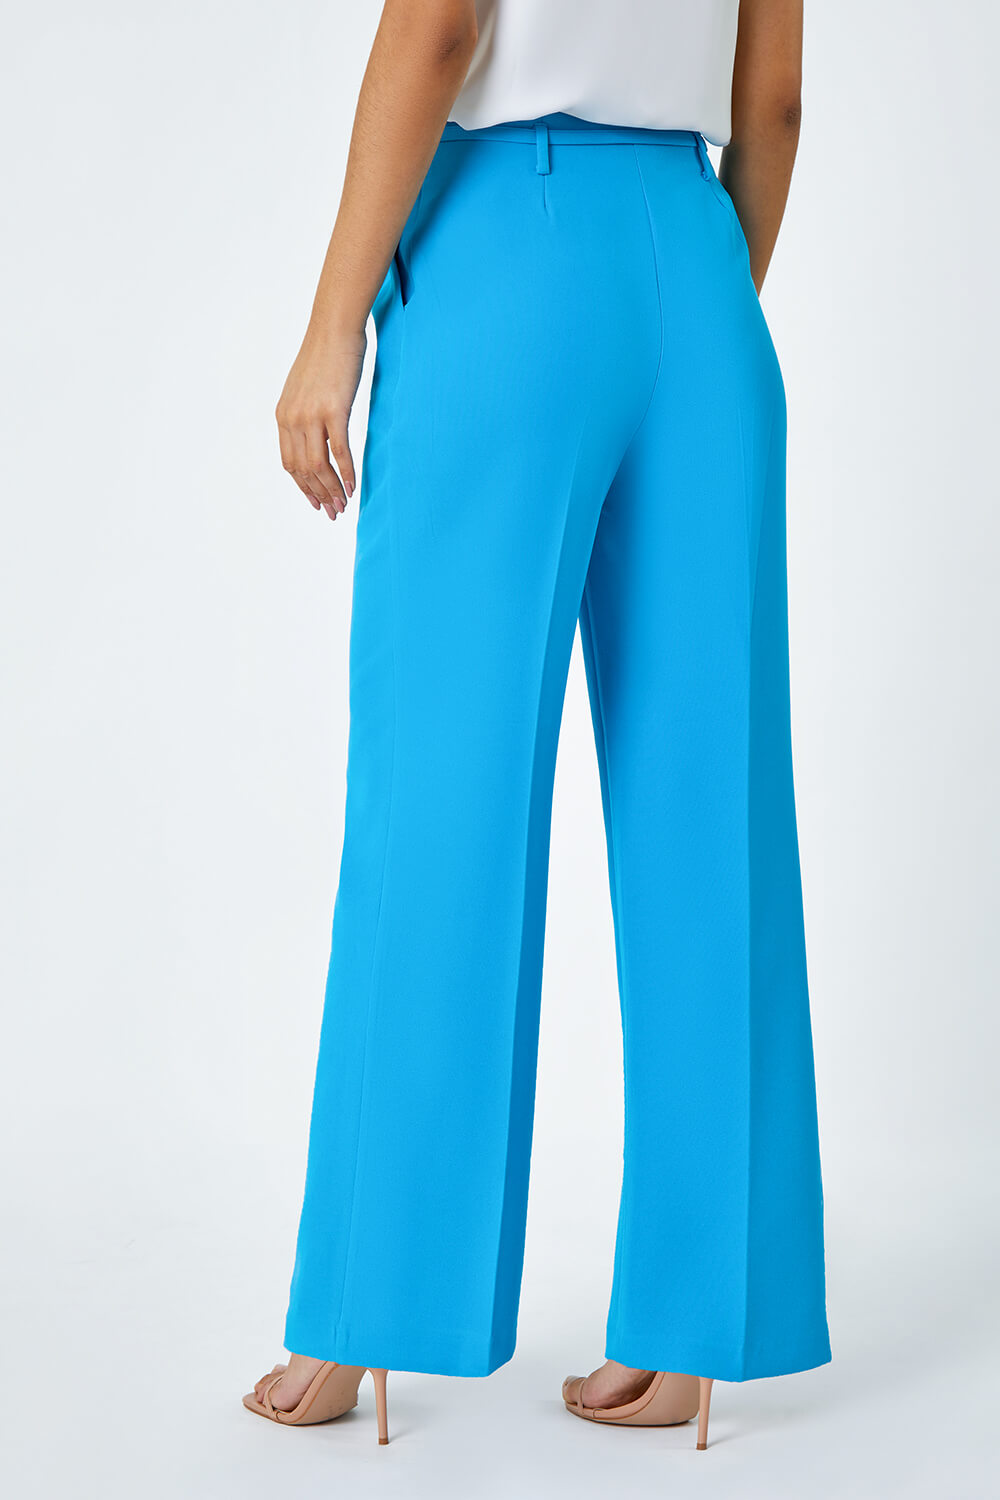 Turquoise Crepe Stretch Straight Leg Trousers, Image 3 of 5